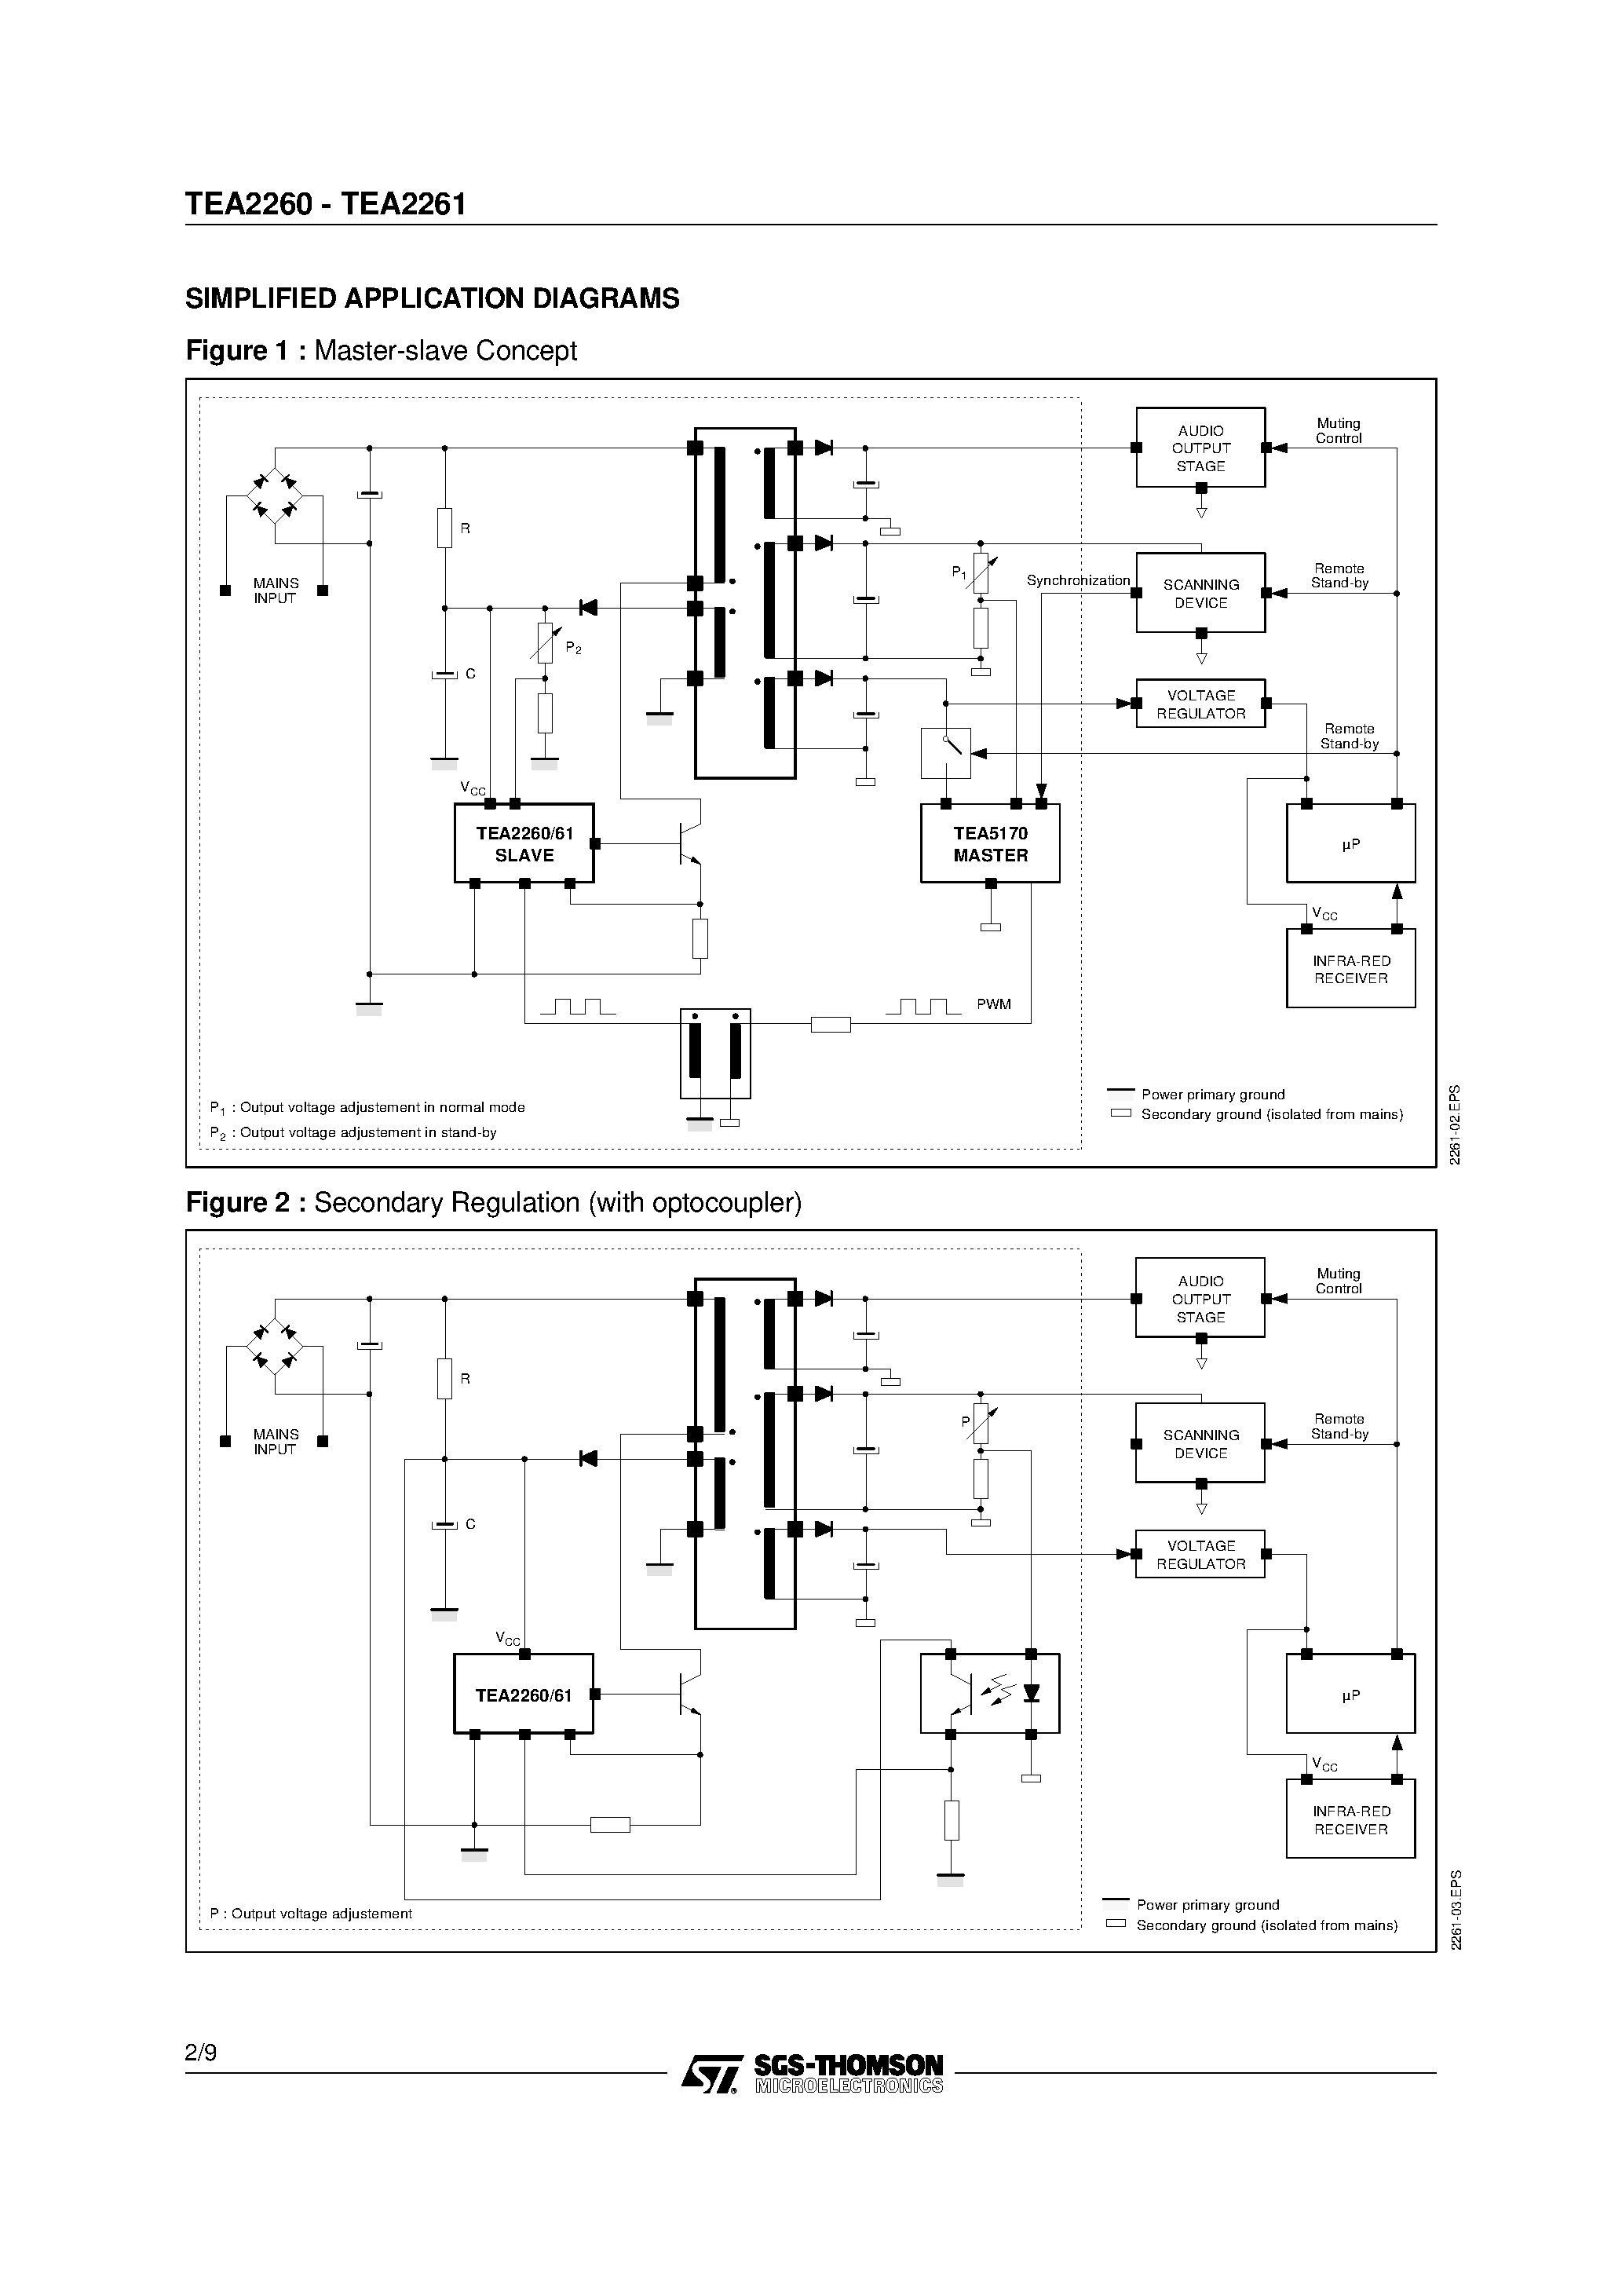 Datasheet TEA-2261 - SWITCH MODE POWER SUPPLY CONTROLLER page 2